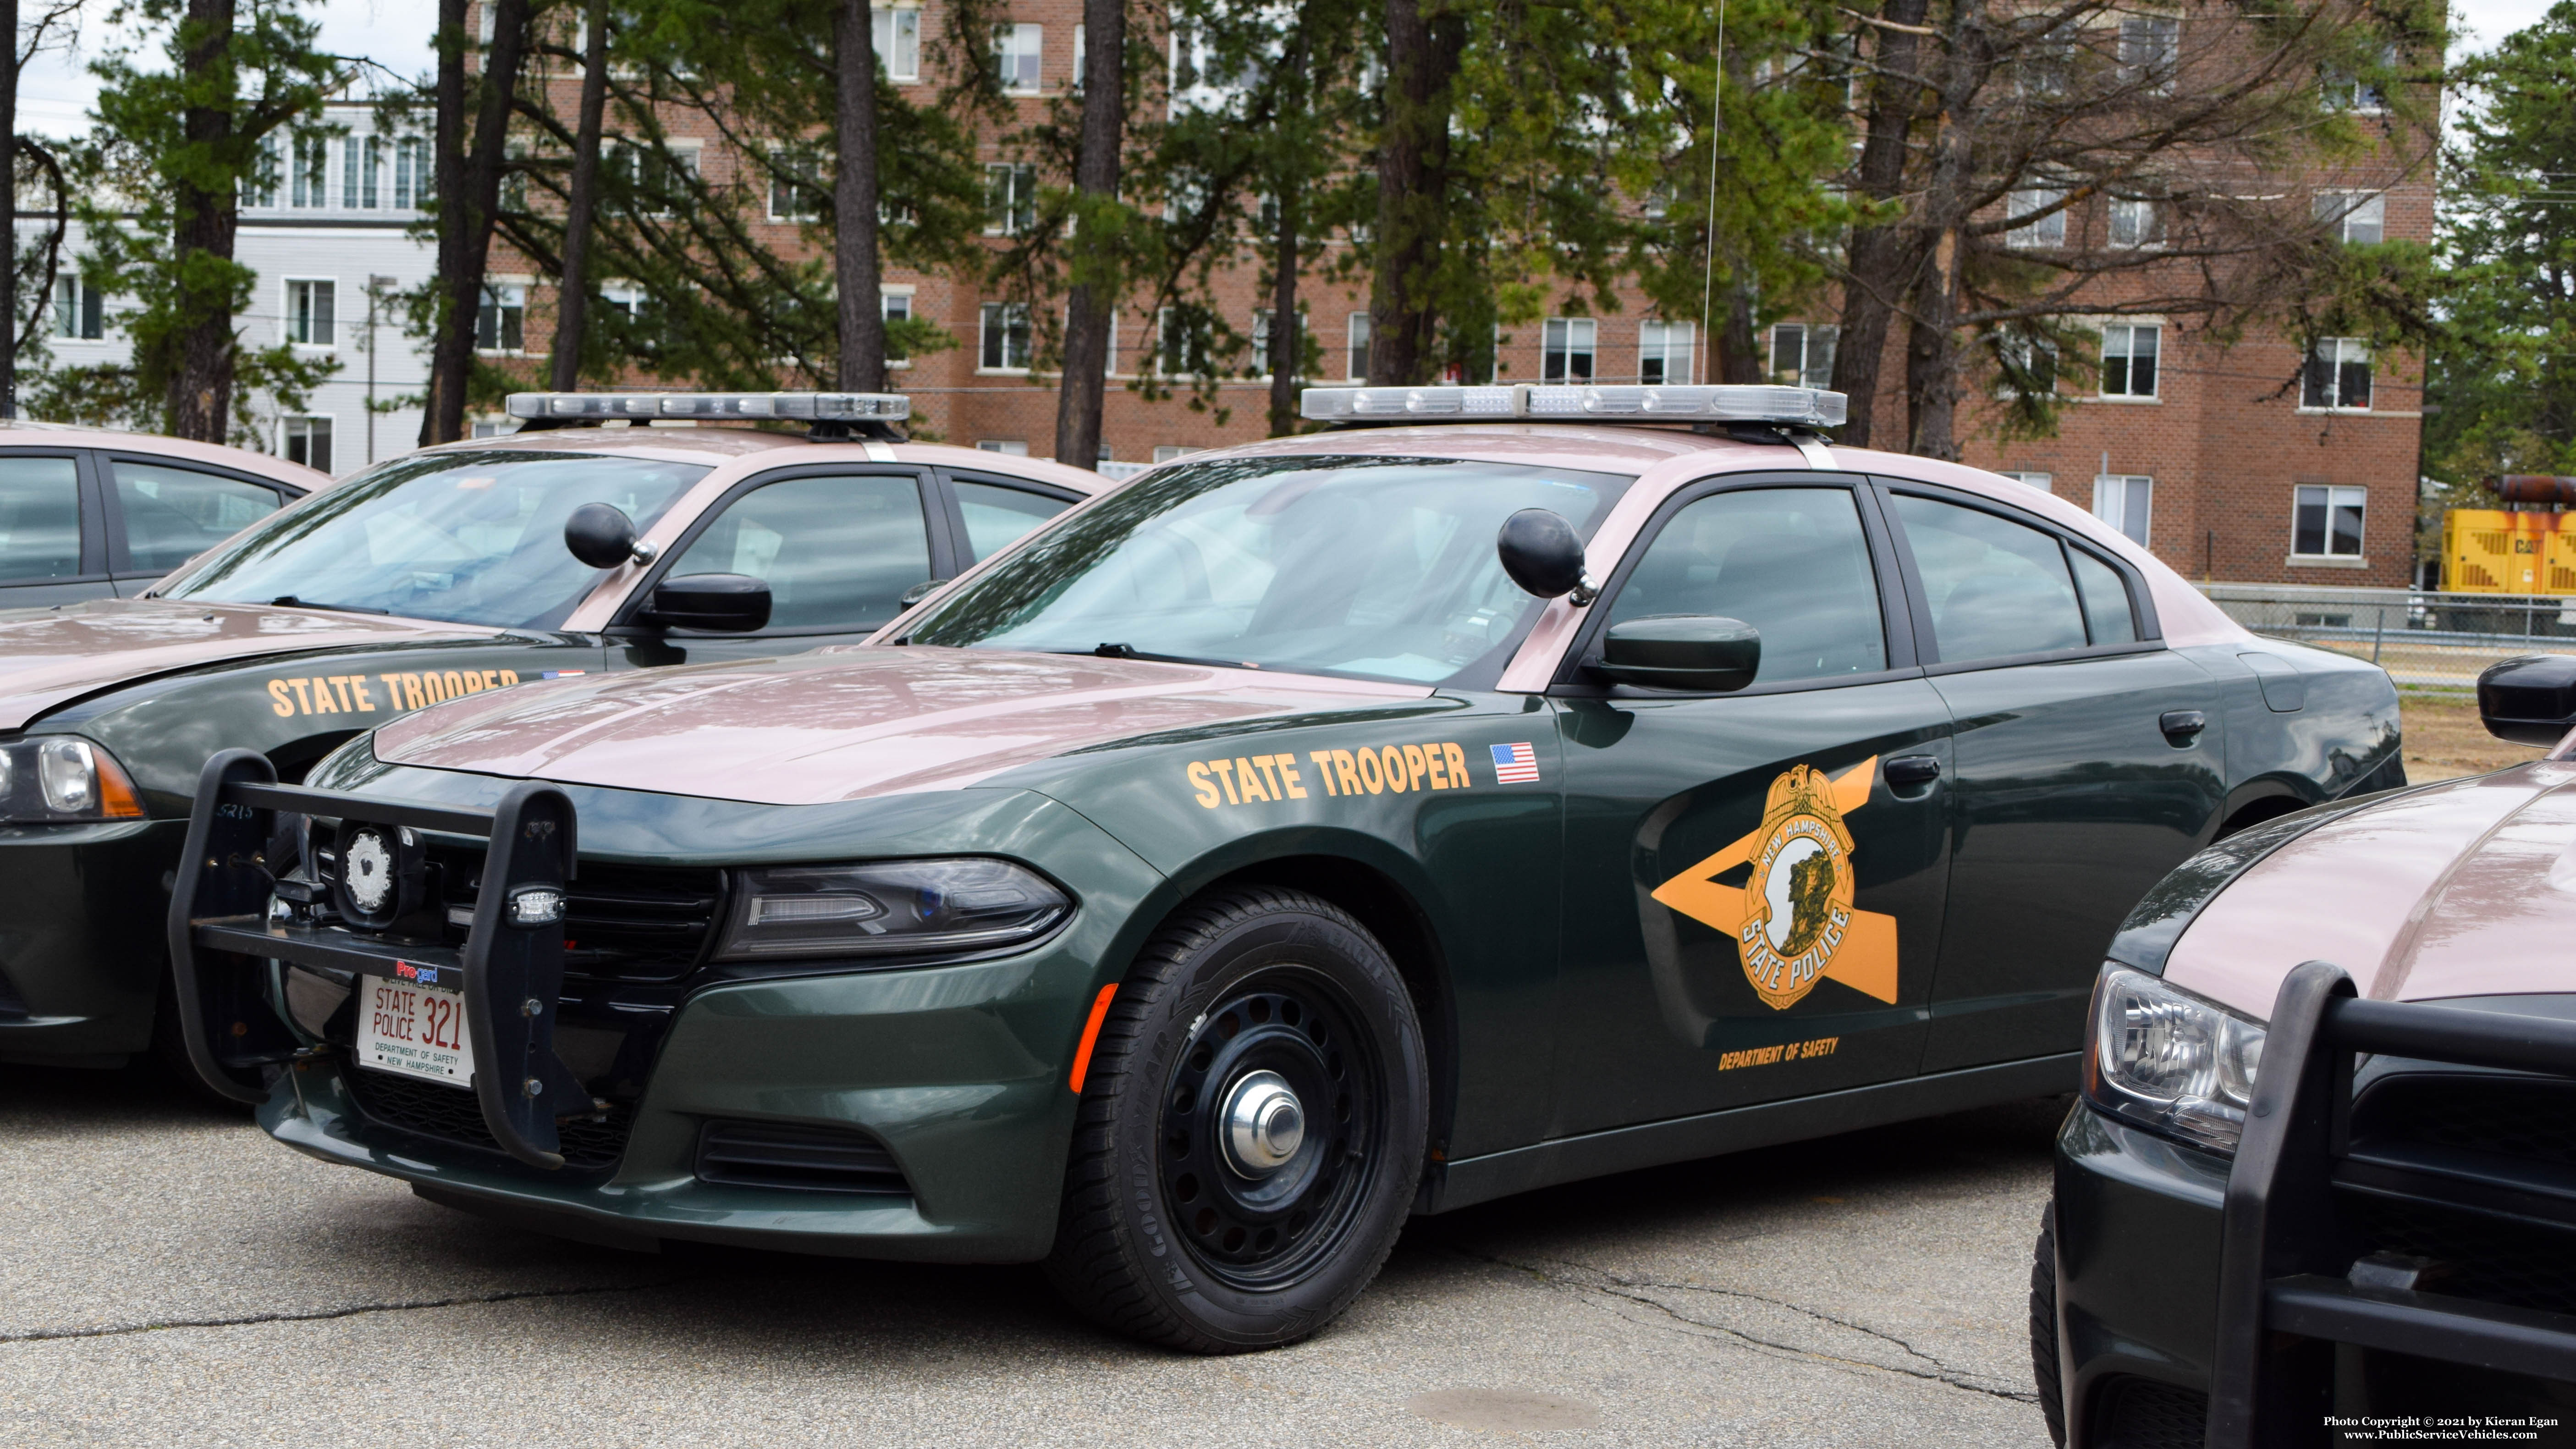 A photo  of New Hampshire State Police
            Cruiser 321, a 2015-2016 Dodge Charger             taken by Kieran Egan